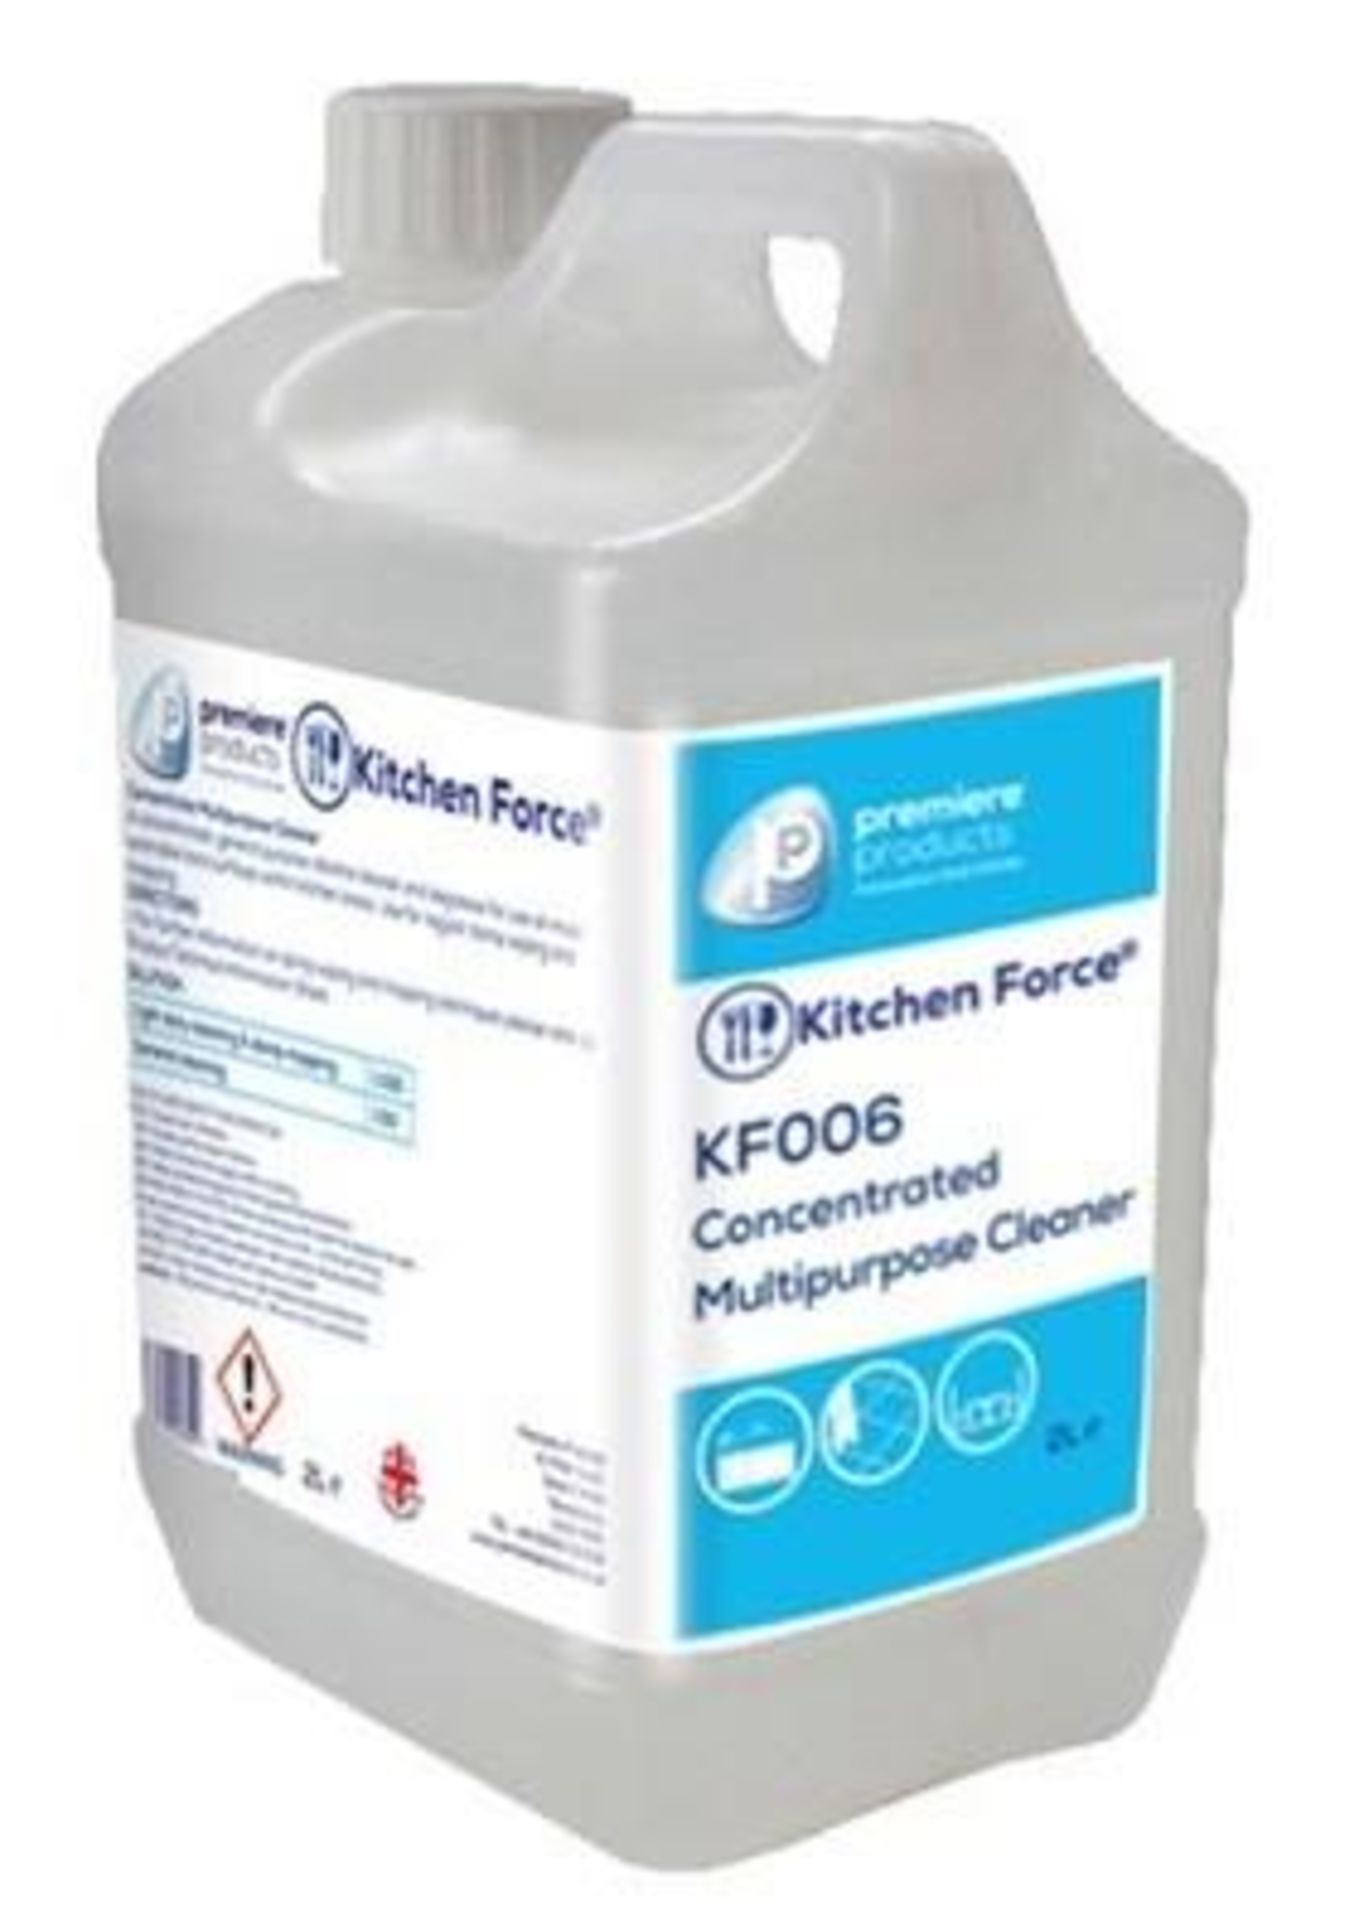 4 x Kitchen Force 2 Litre Multipurpose Cleaner and Degreaser - Premiere Products - General Purpose